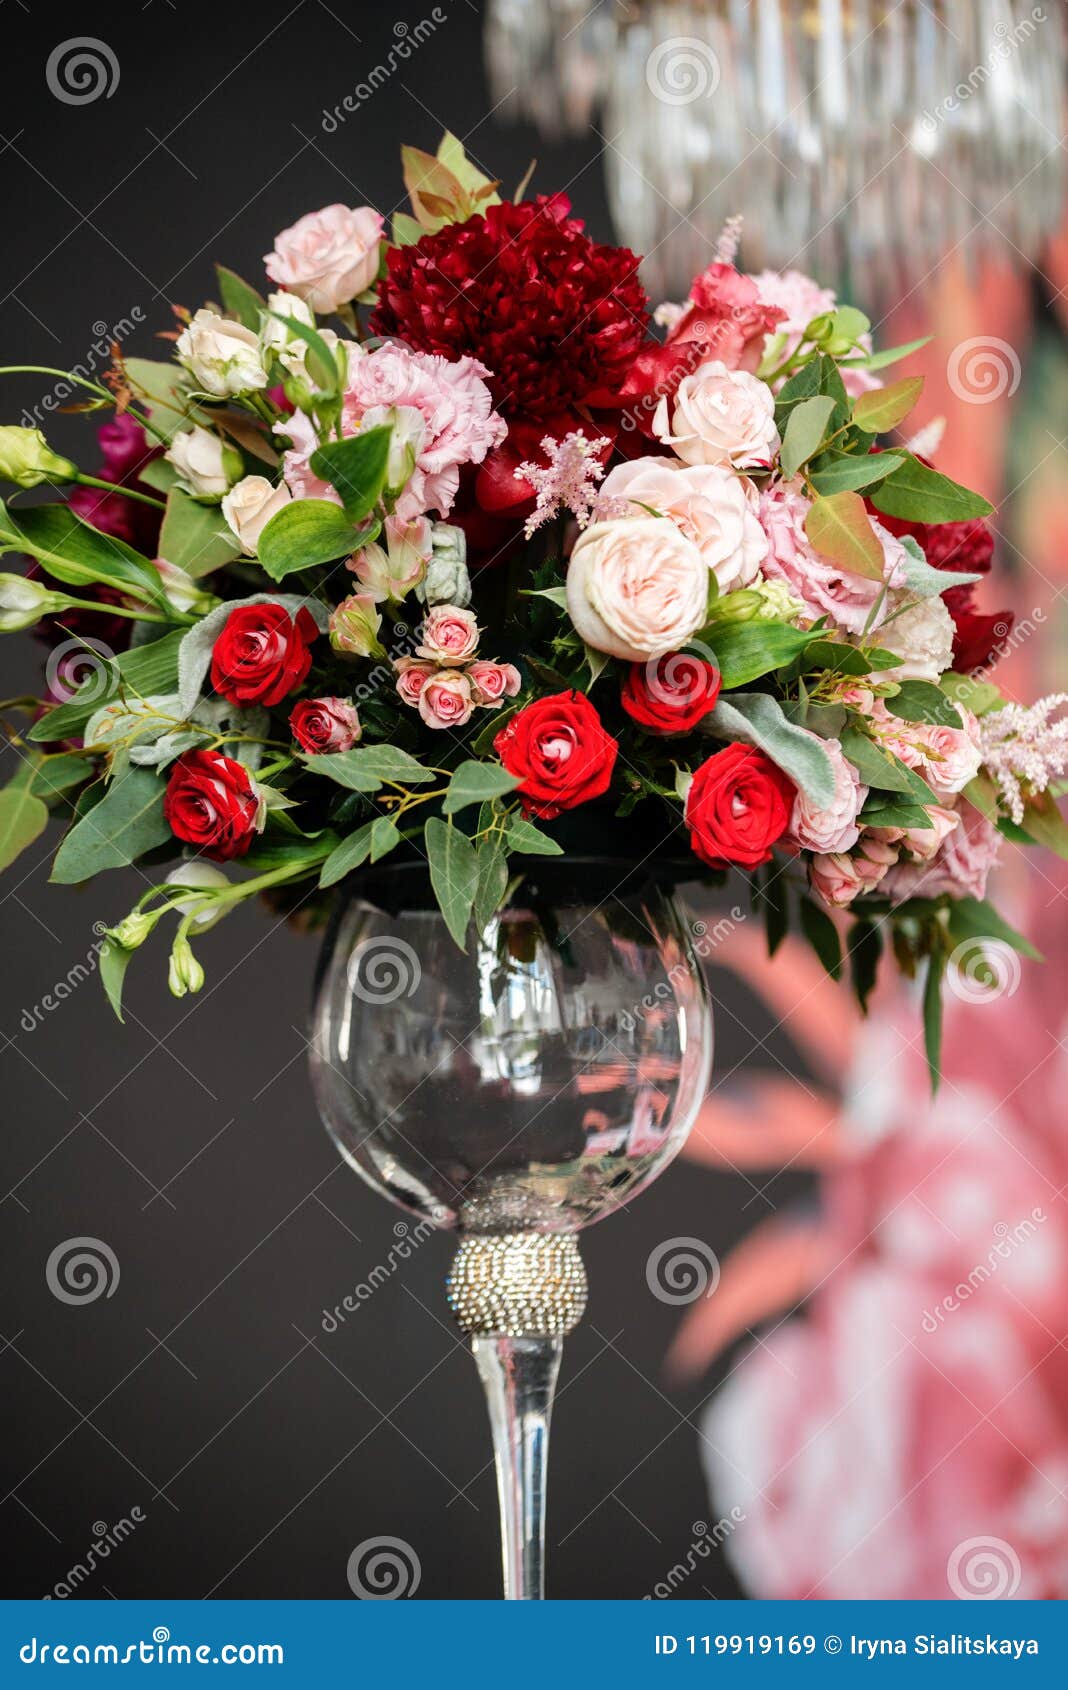 Beautiful Wedding Bouquets Of The Bride And Girlfriend Of The Bride On A Dark Background Stock Image Image Of Background Bouquet 119919169